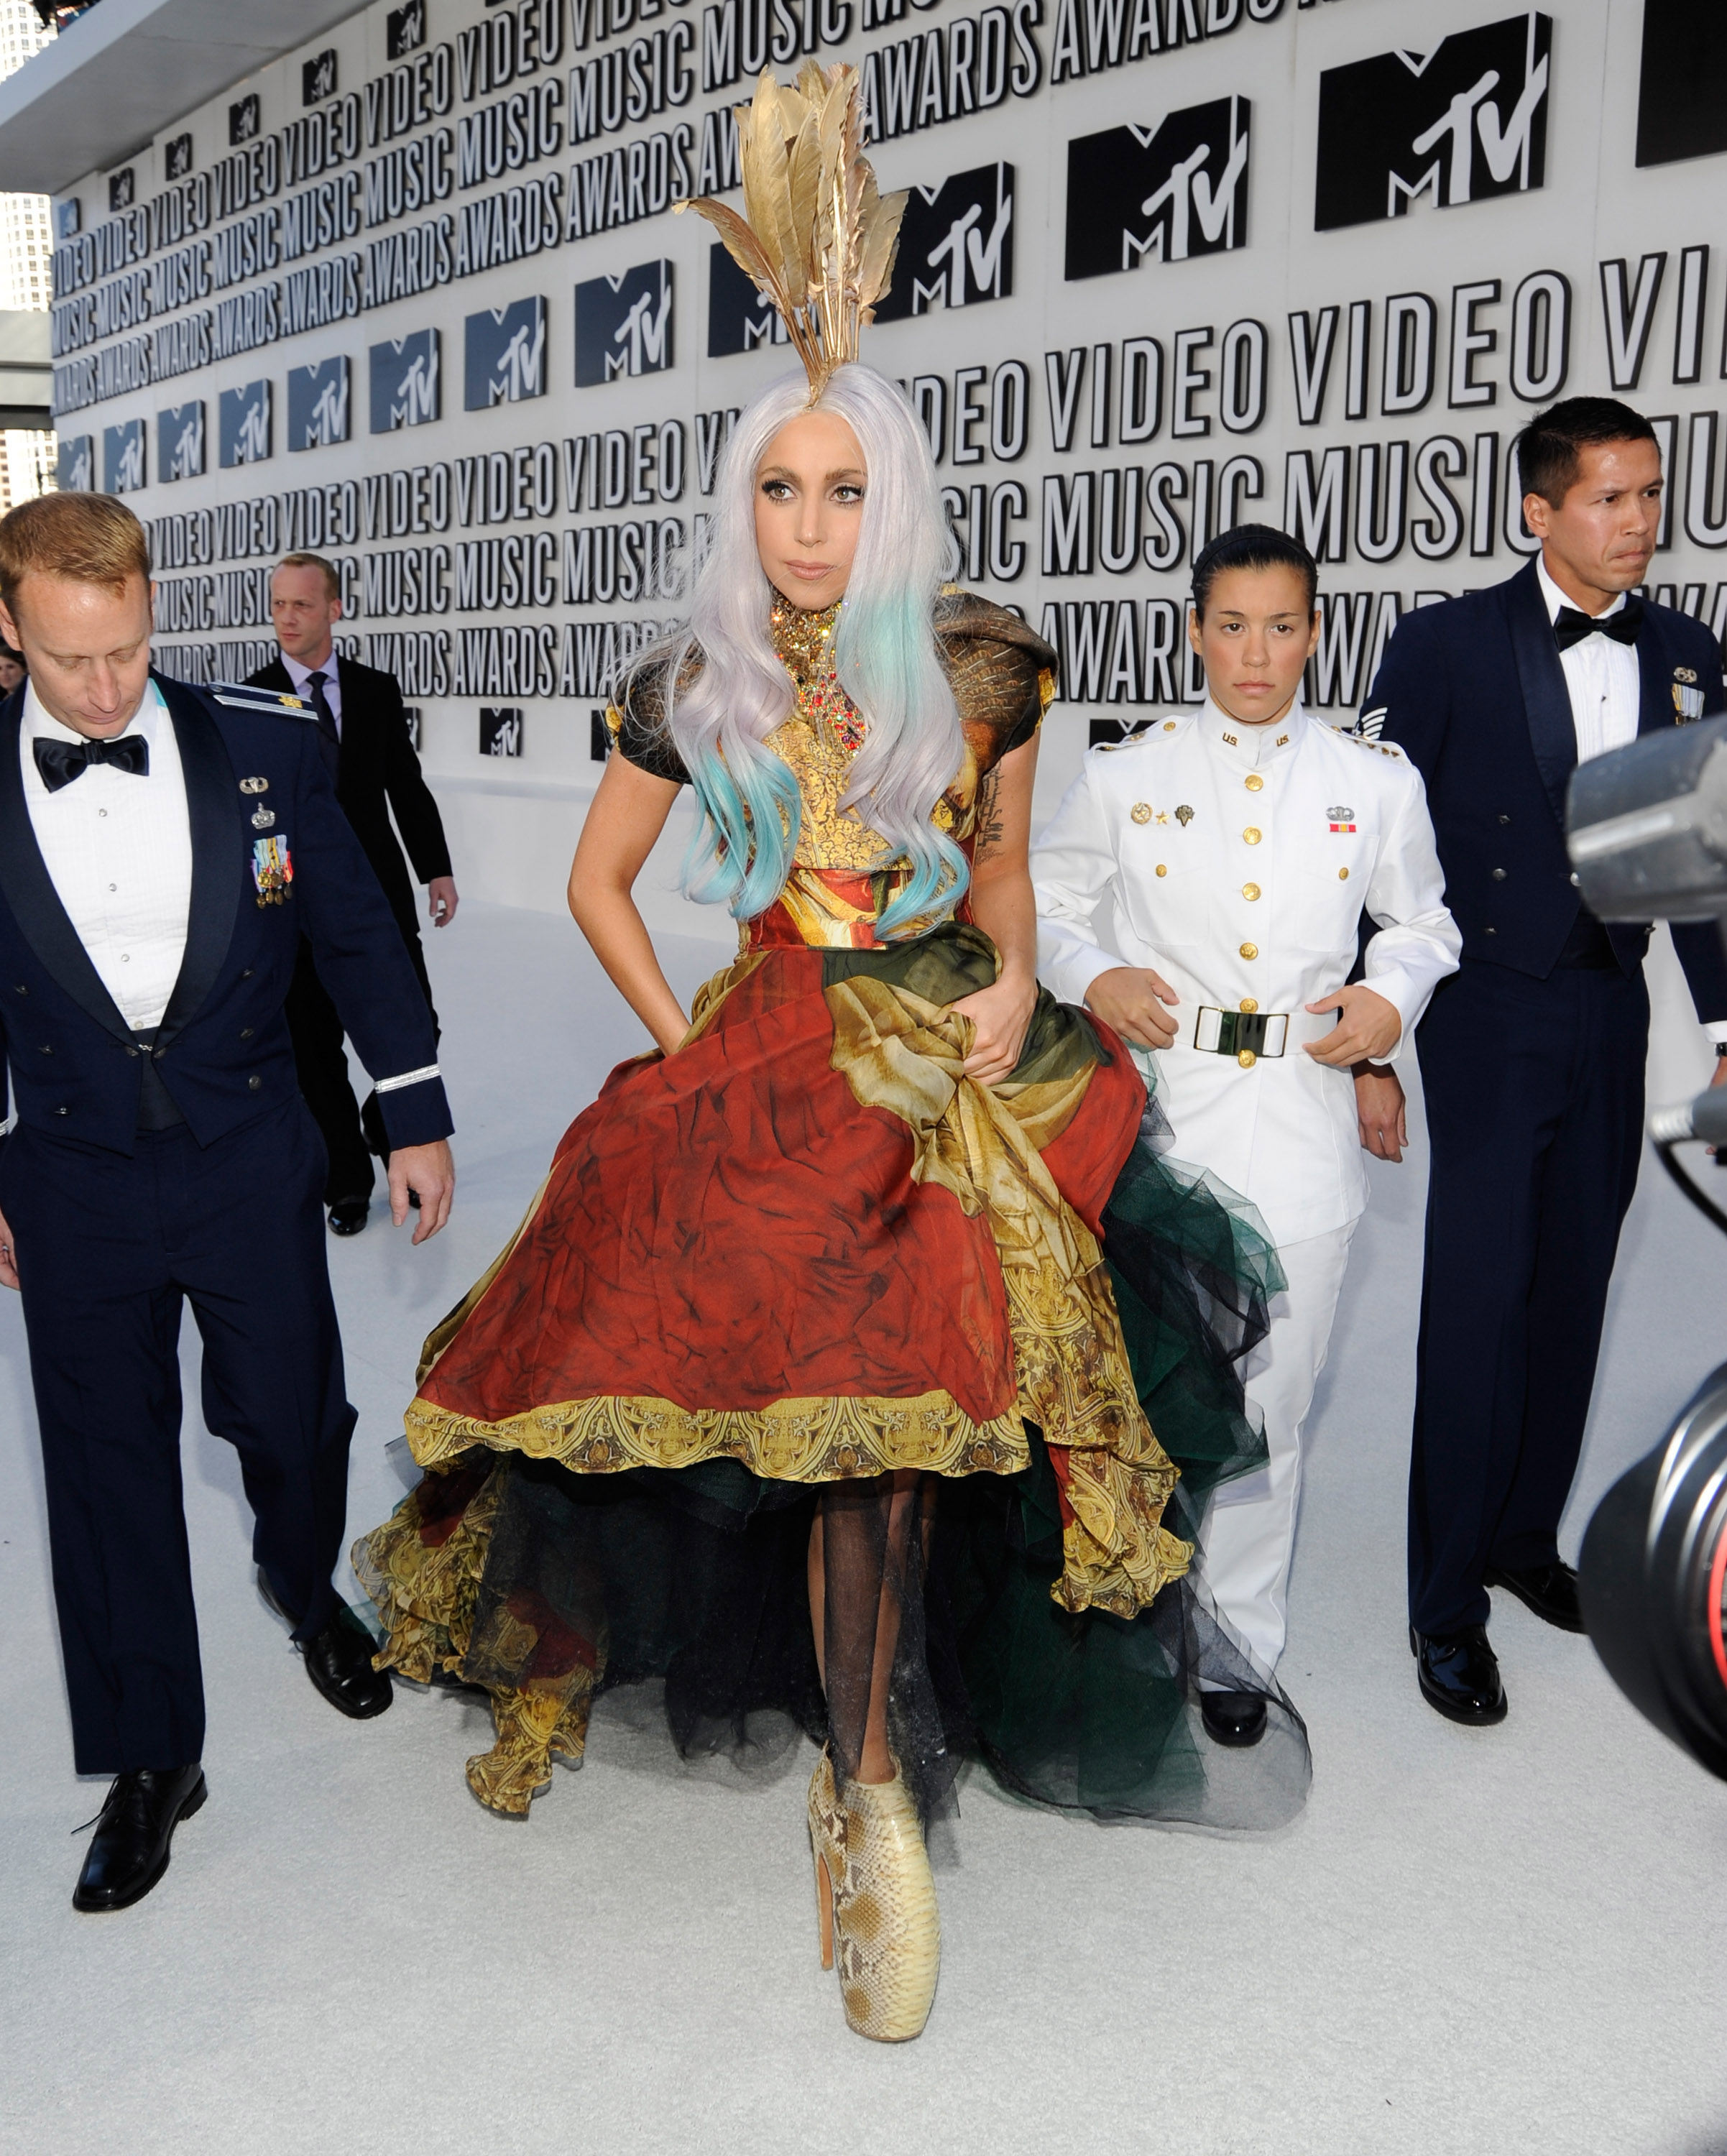 Lady Gaga arrives at the 2010 MTV Video Music Awards held at Nokia Theatre L.A. Live on September 12, 2010 in Los Angeles, California. (Kevin Mazur—WireImage)